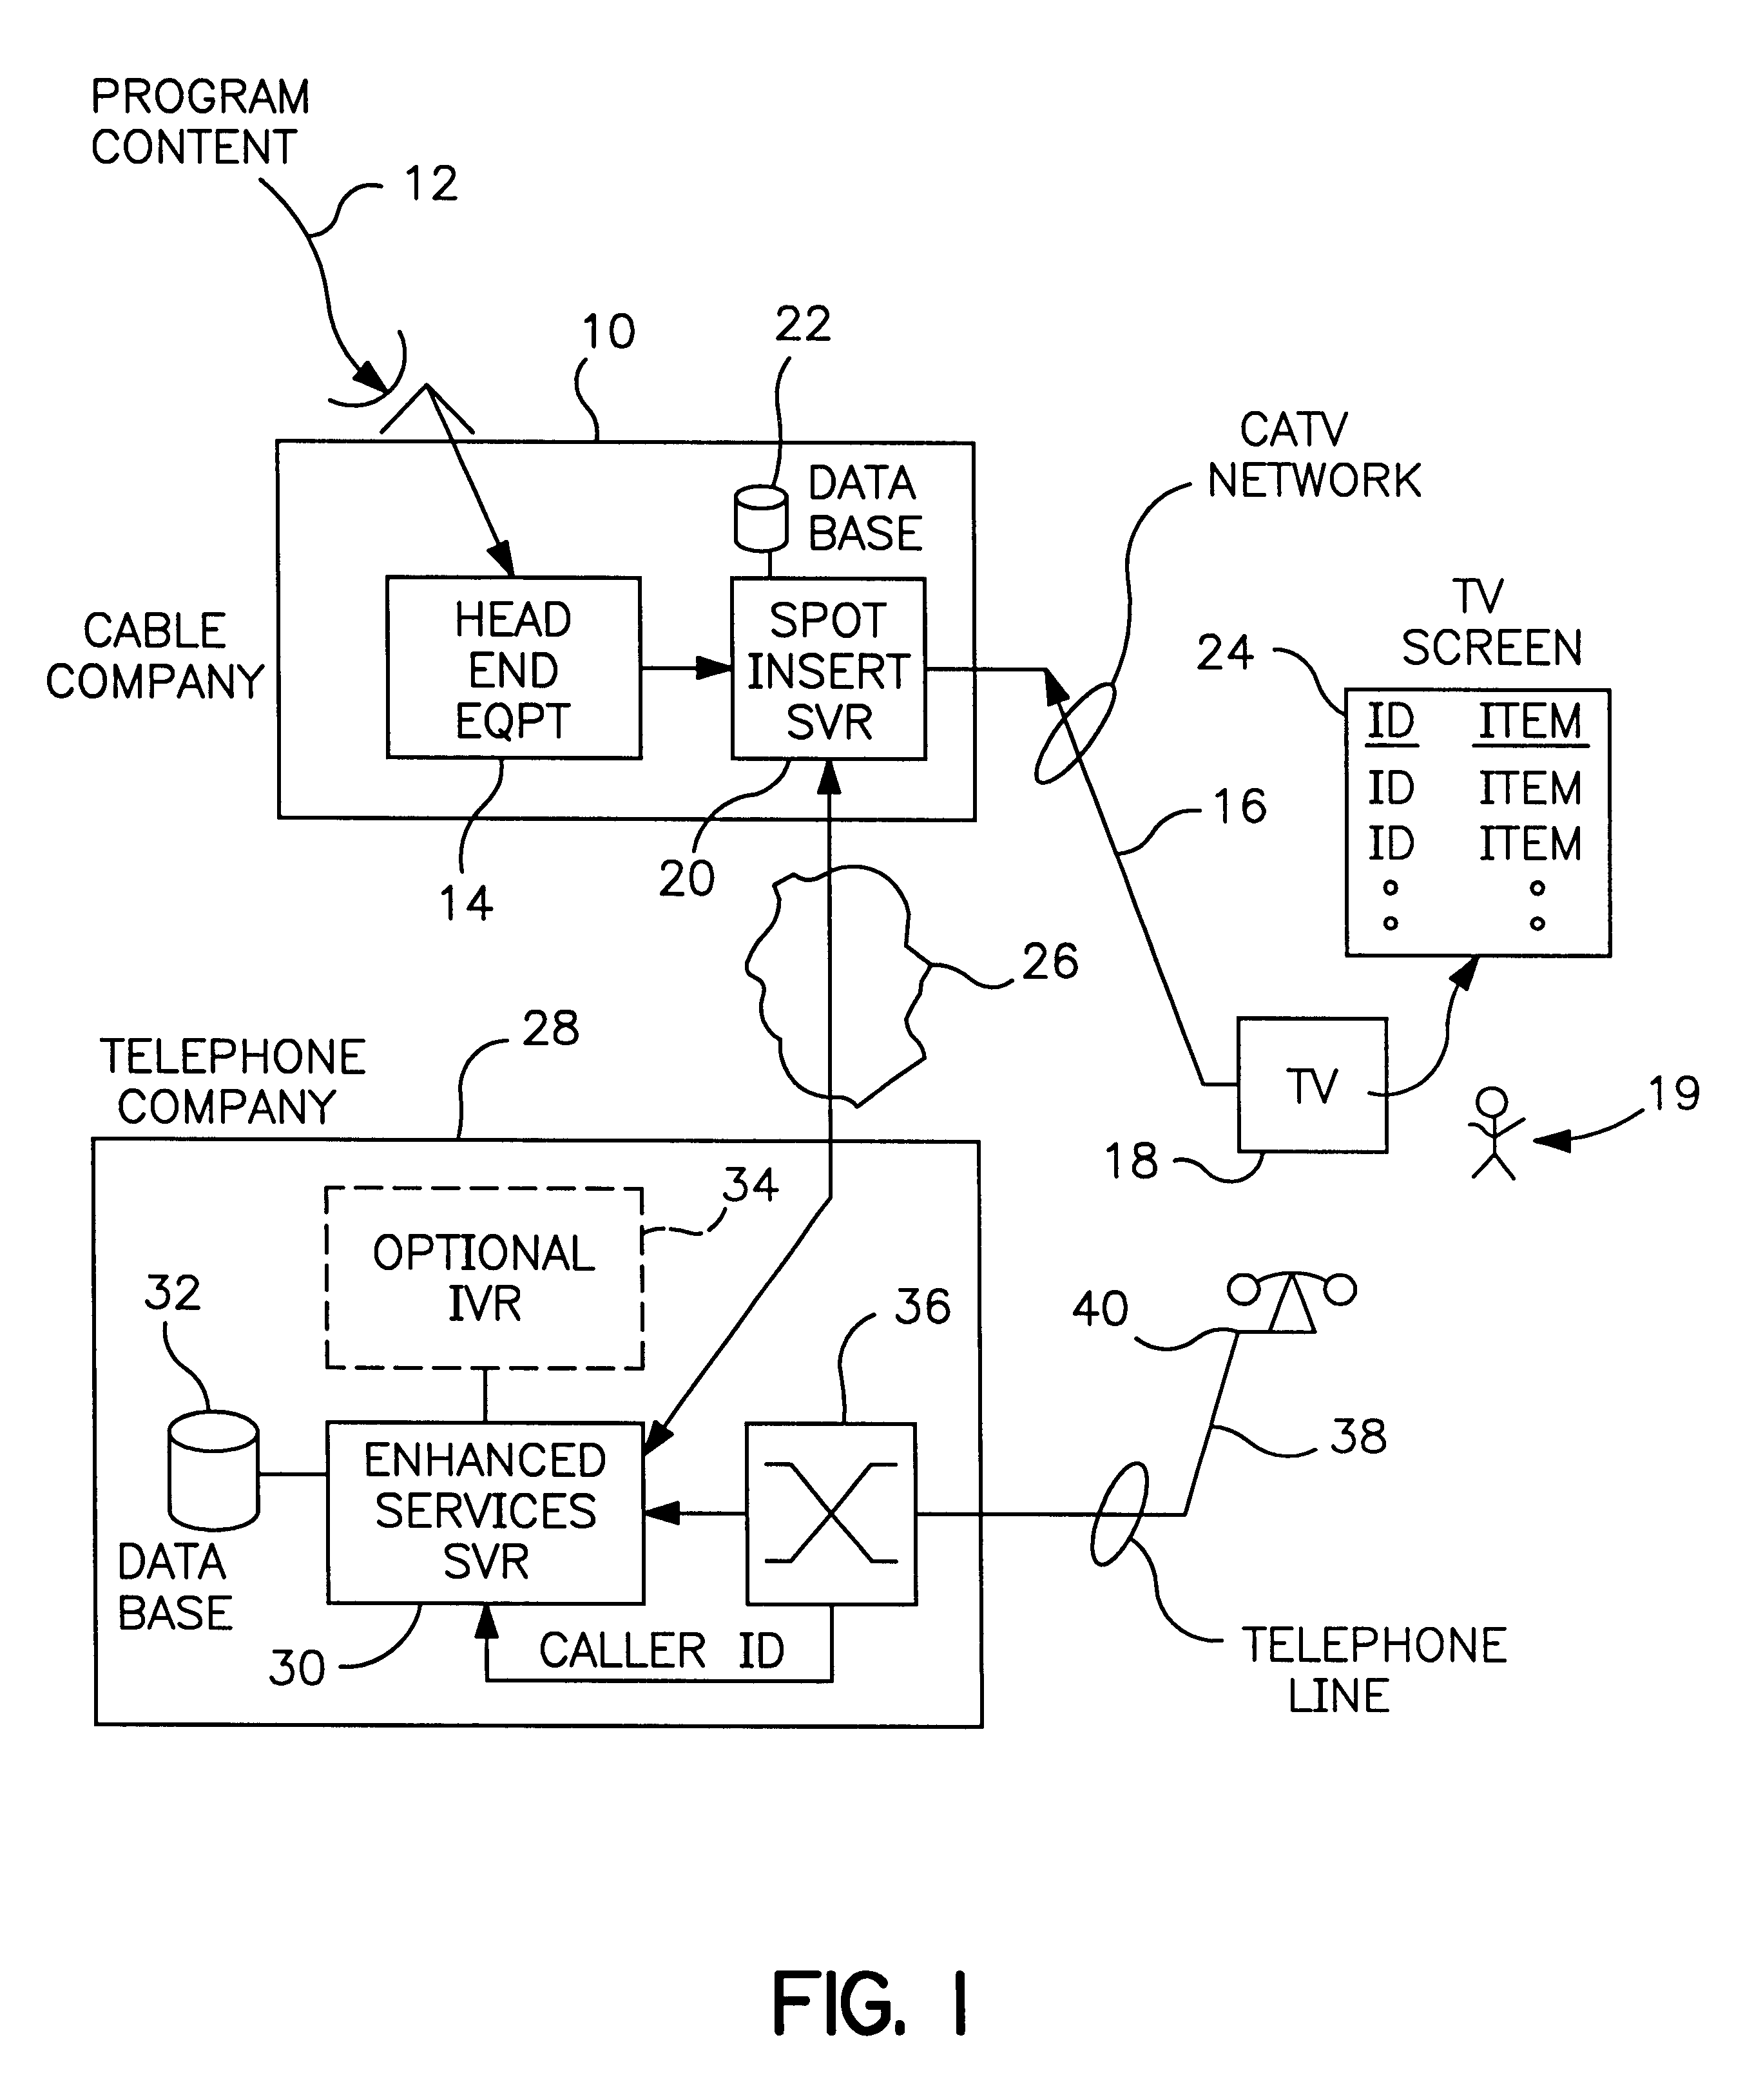 Simplified TV viewer response system and method using special codes and subscriber custom calling codes